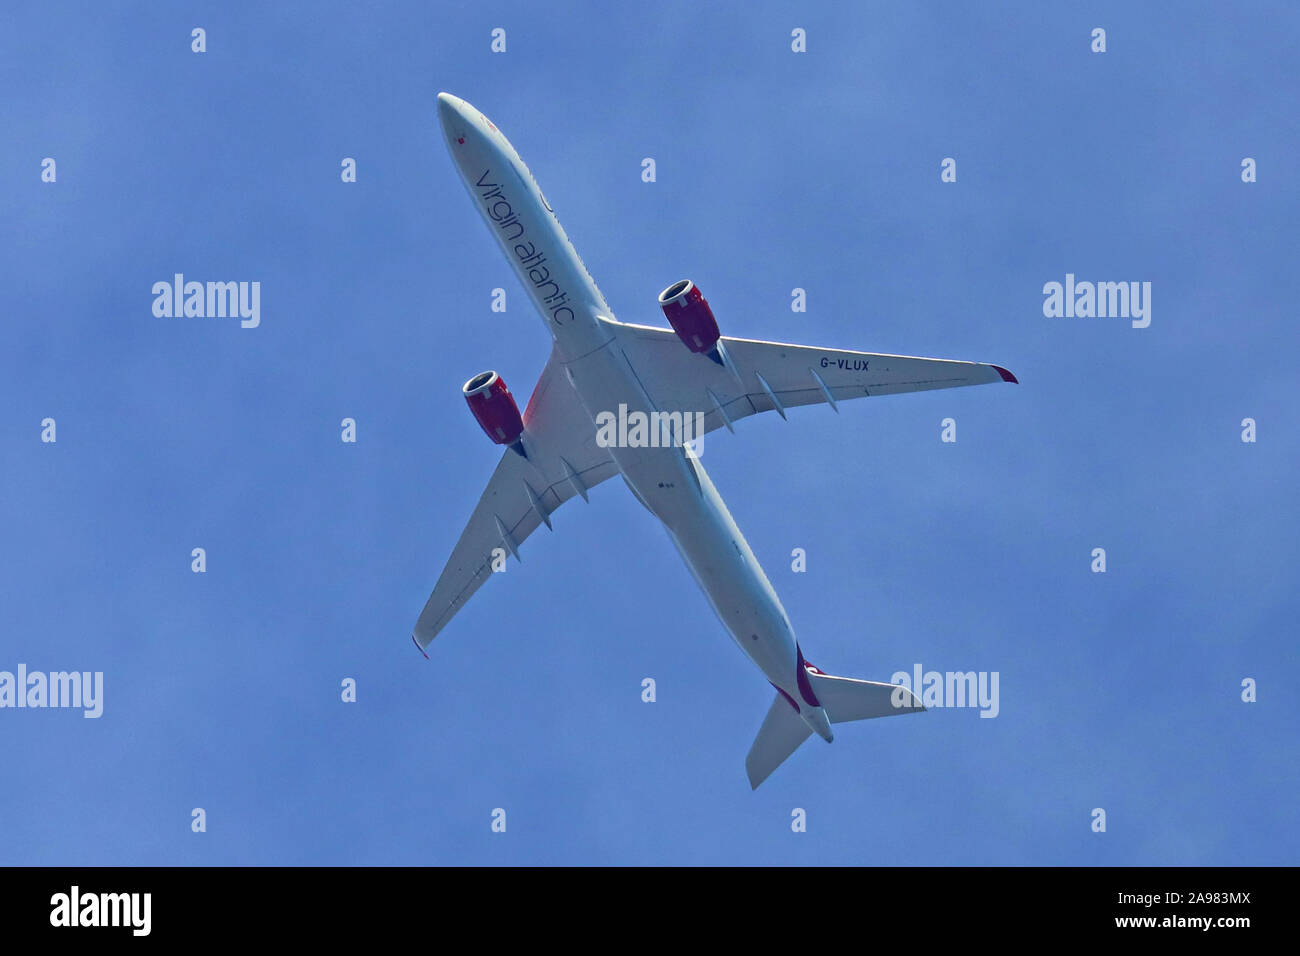 Airbus A350-1041 G-VLUX flying overhead, set against a blue sky background. Stock Photo